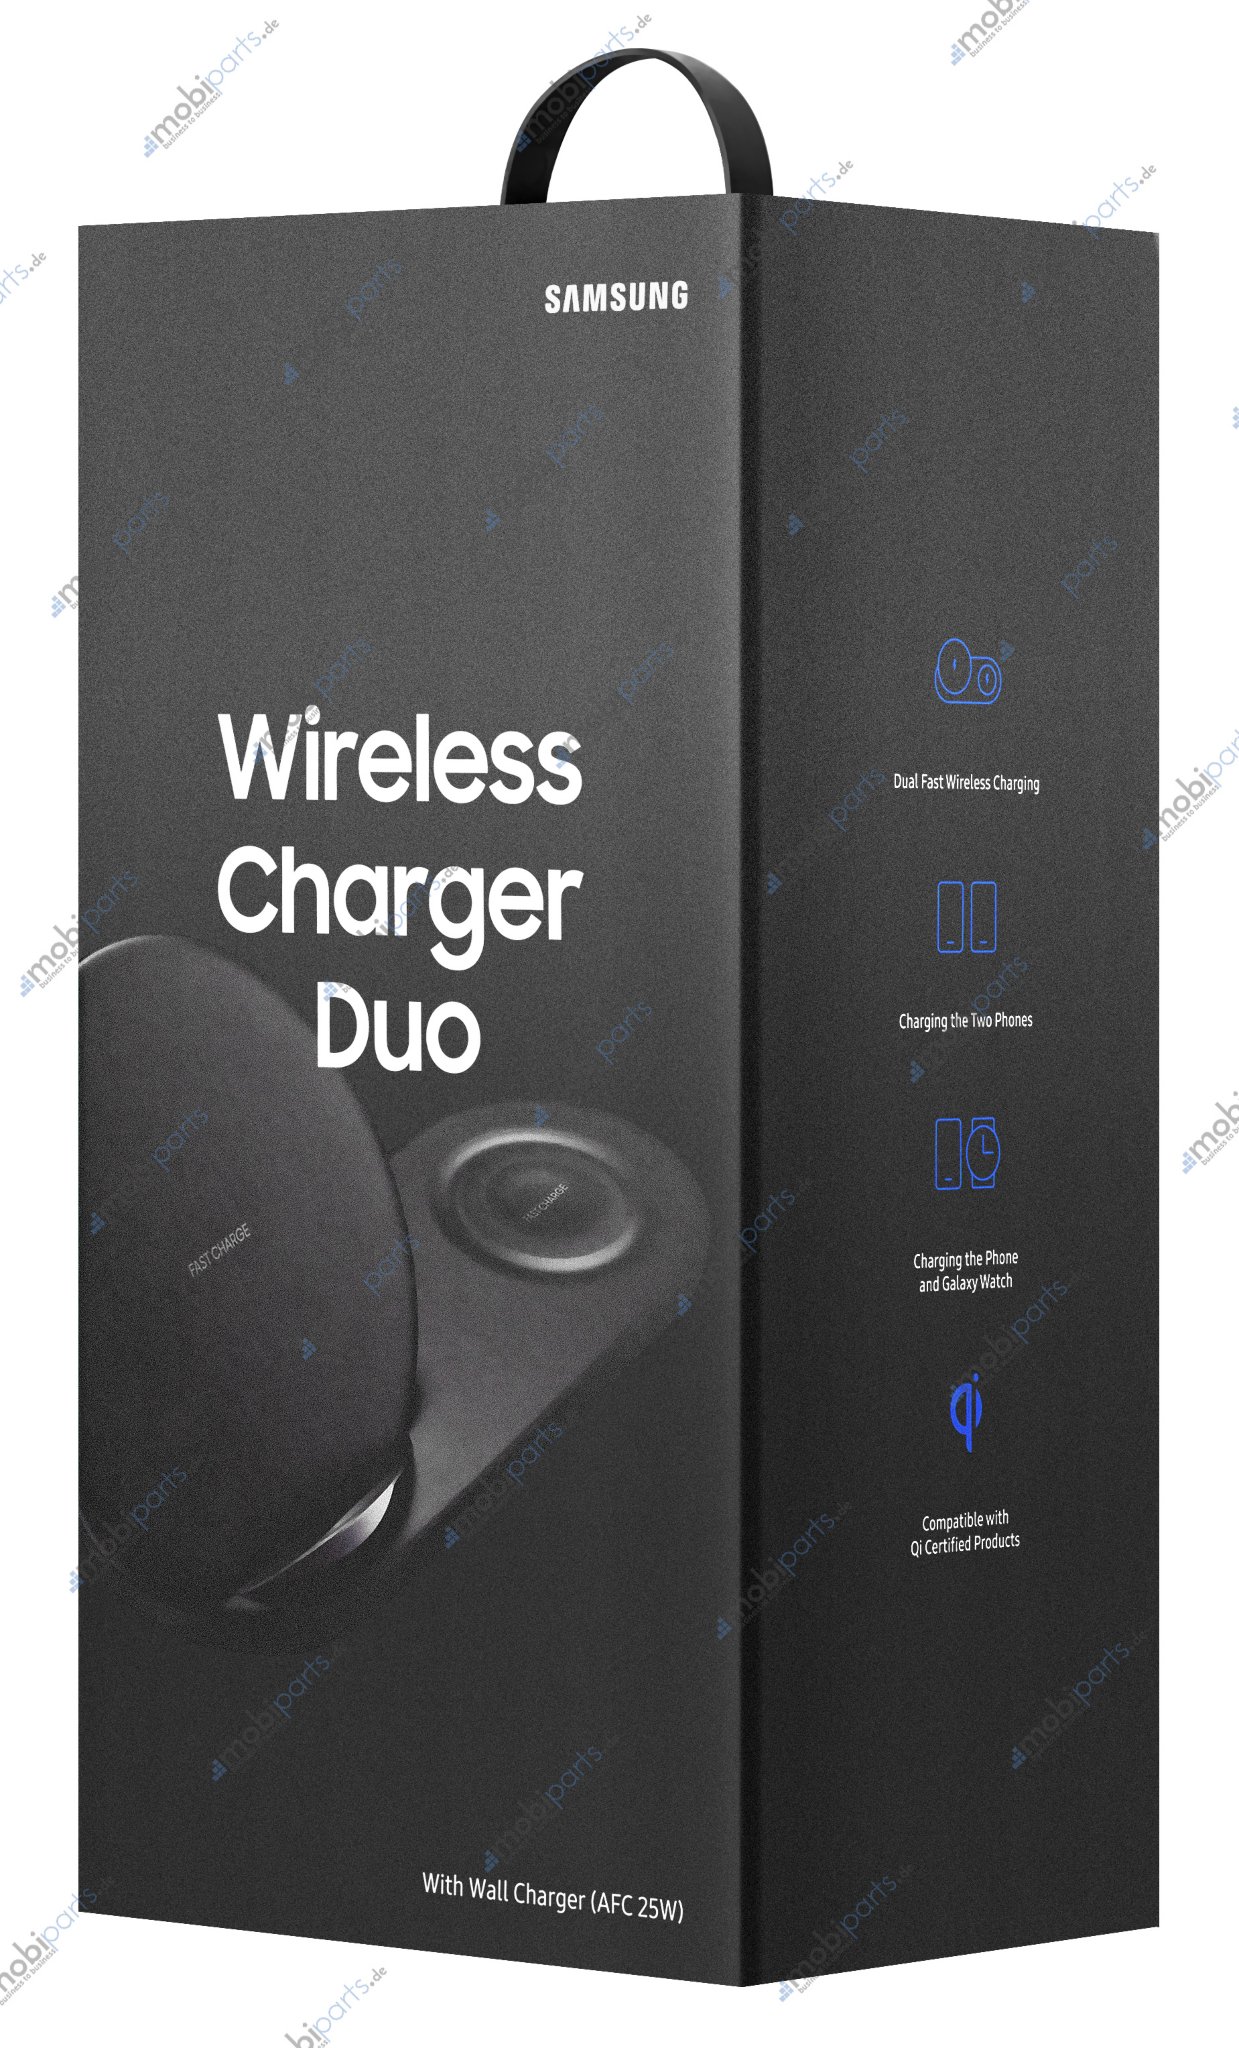 Samsung wants to launch a double wireless charger because apple has one too 522067 2